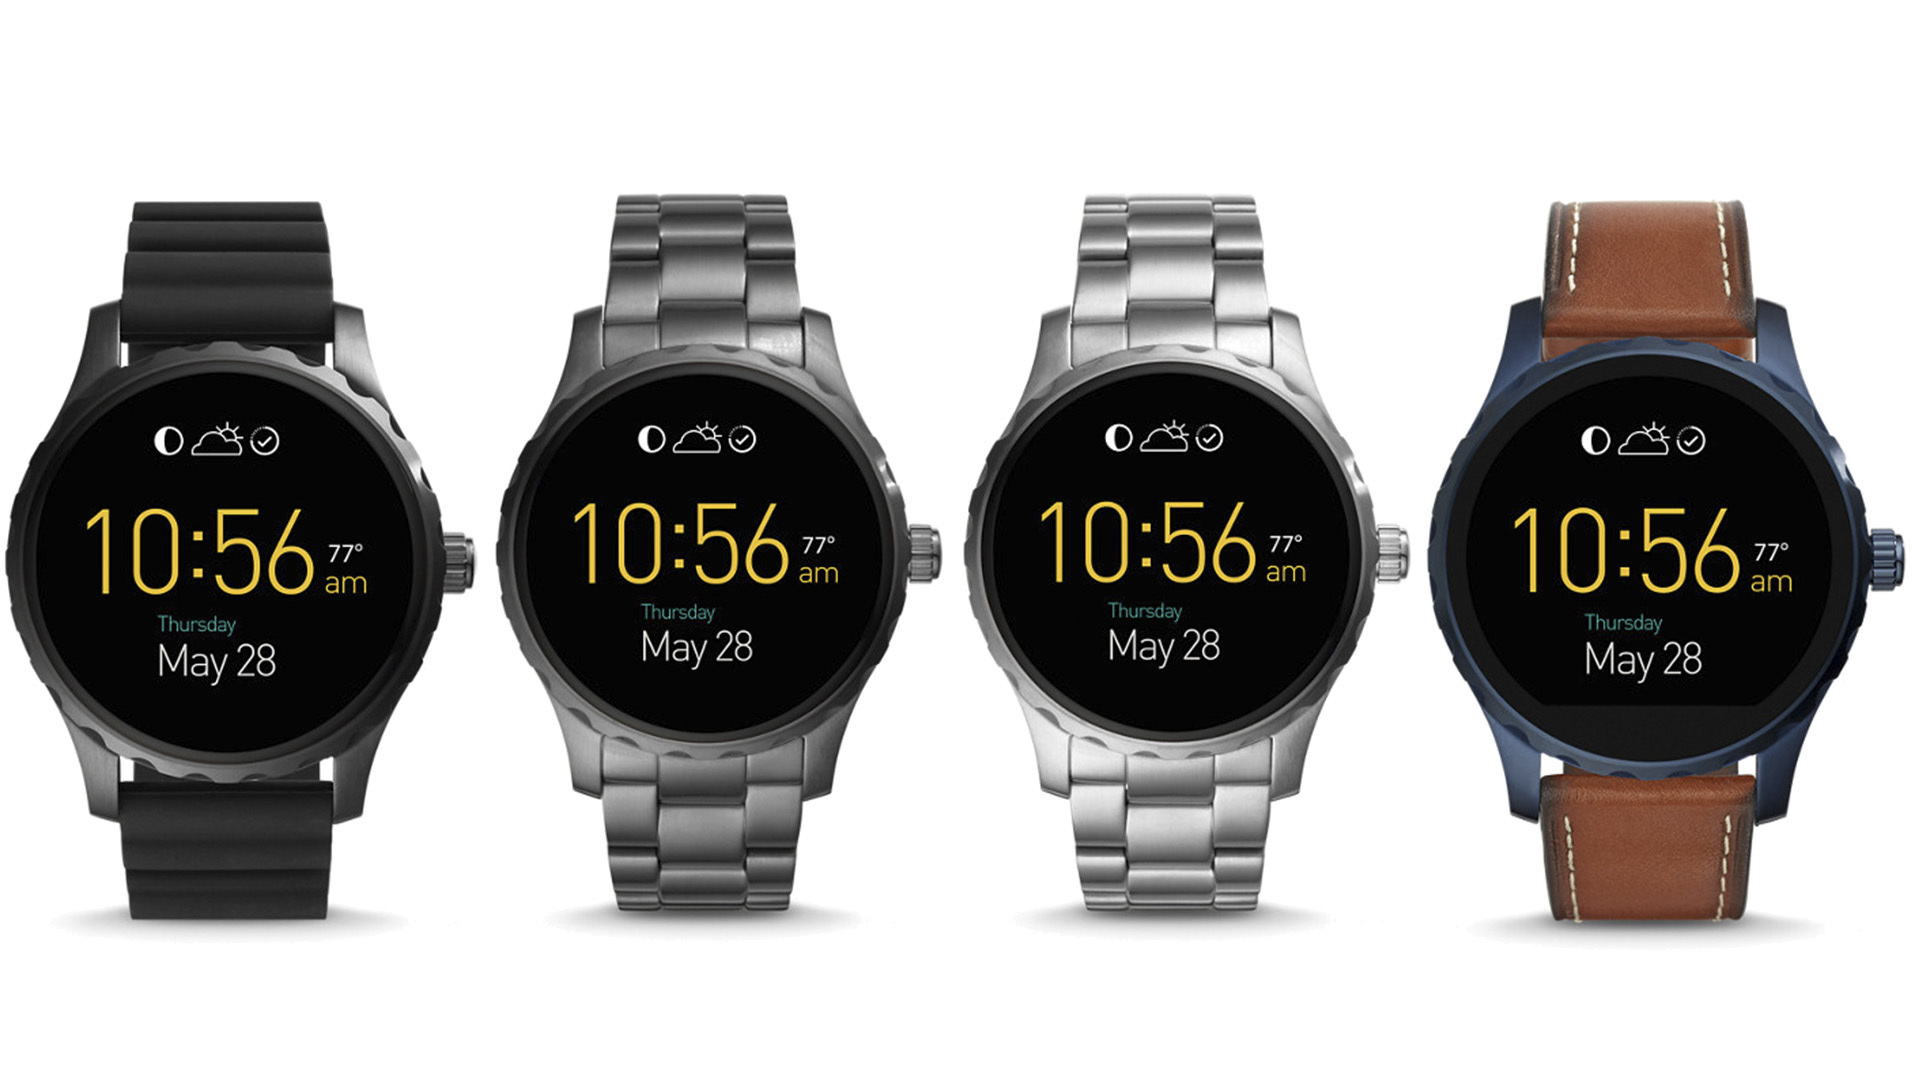 Fossil Q Marshal Test Online Deals, UP TO 50% OFF |  www.encuentroguionistas.com